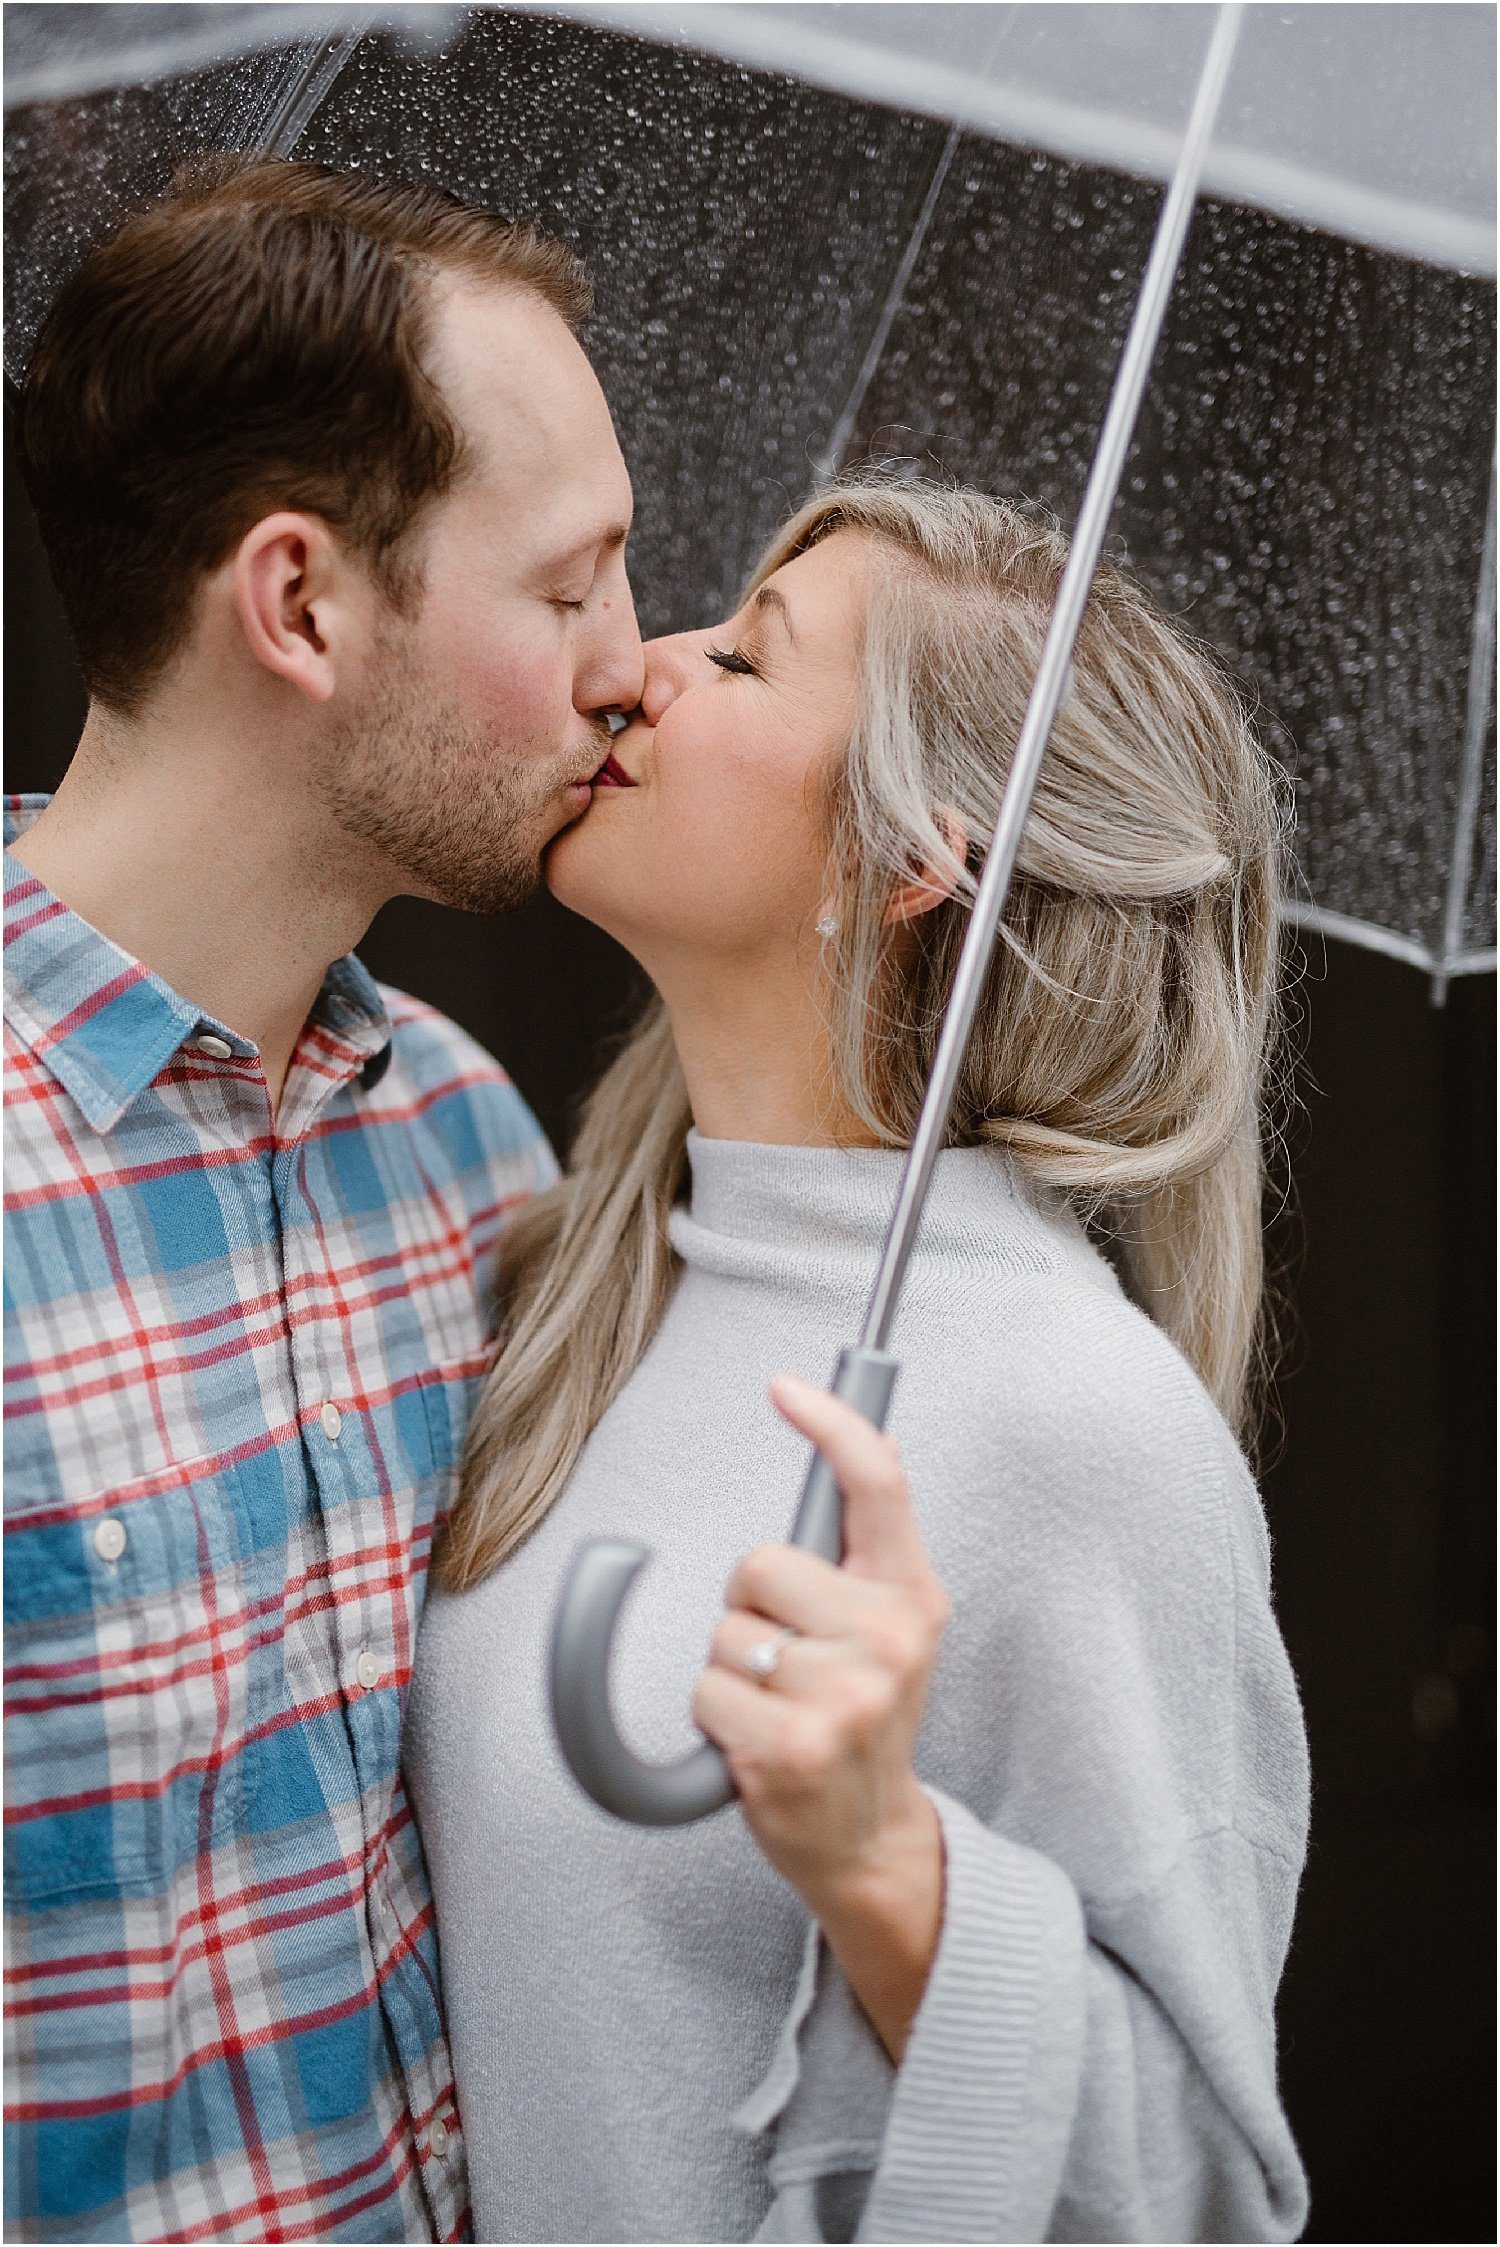 Rainy Day Industrial Engagement Photos in Knoxville | Photographed by Erin Morrison Photography | https://erinmorrisonphotography.com/rainy-day-industrial-engagement-photos-knoxville/